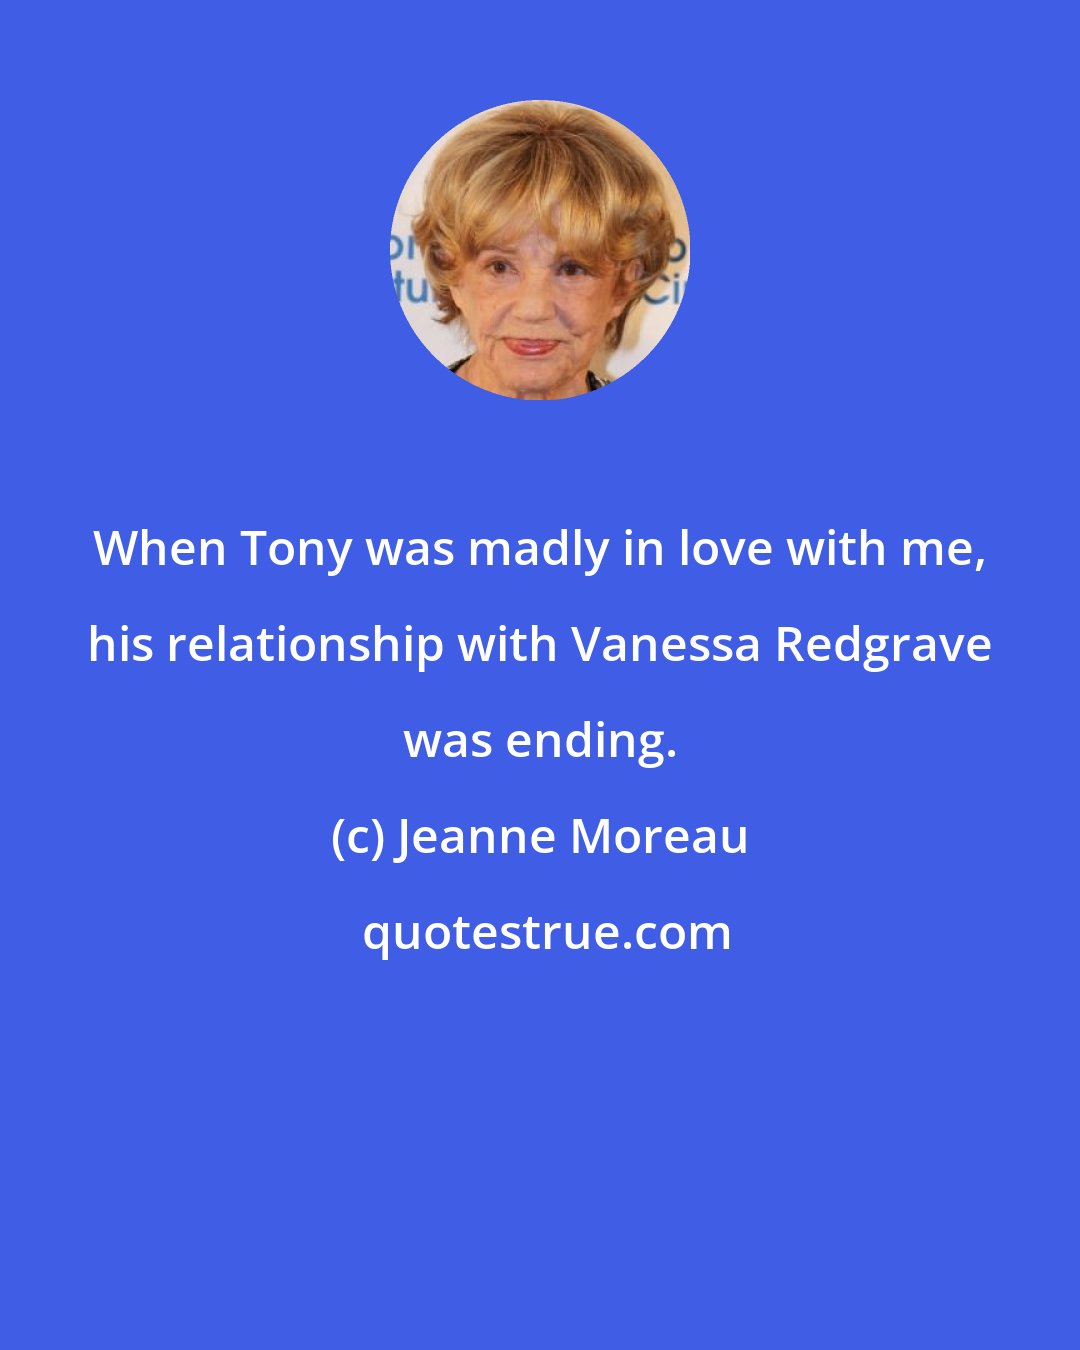 Jeanne Moreau: When Tony was madly in love with me, his relationship with Vanessa Redgrave was ending.